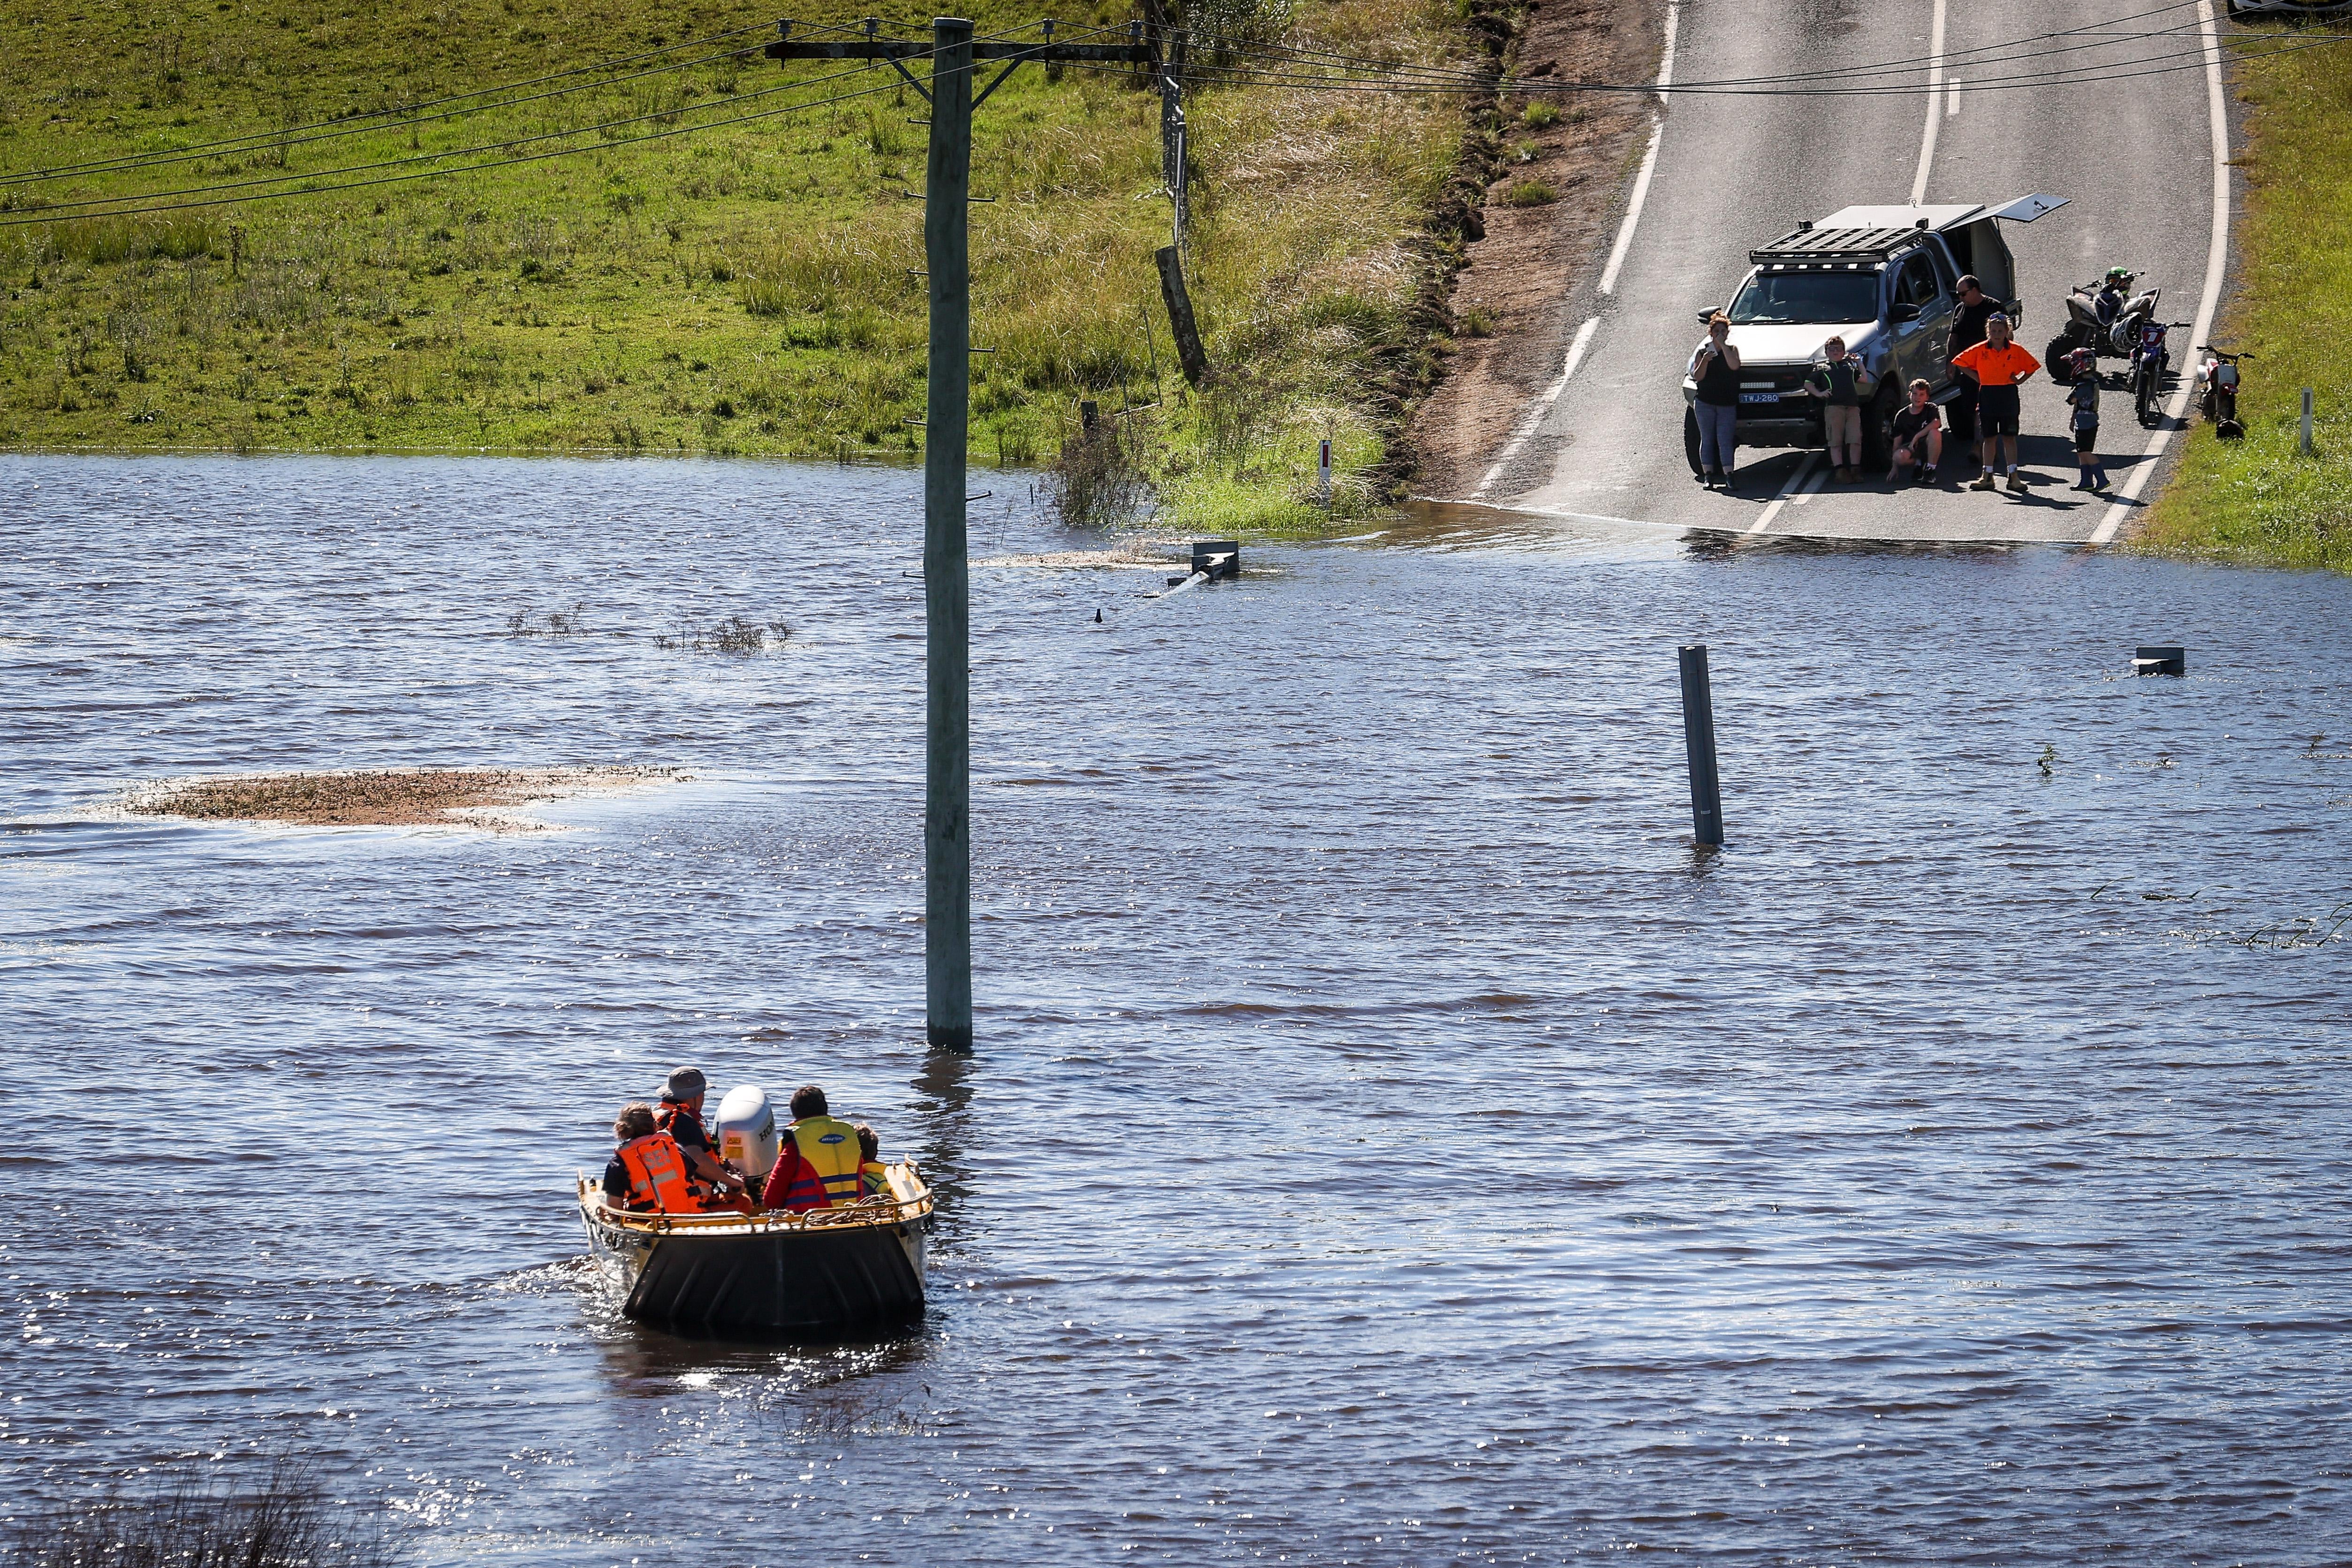 A boat filled with people crosses floodwaters towards a road.